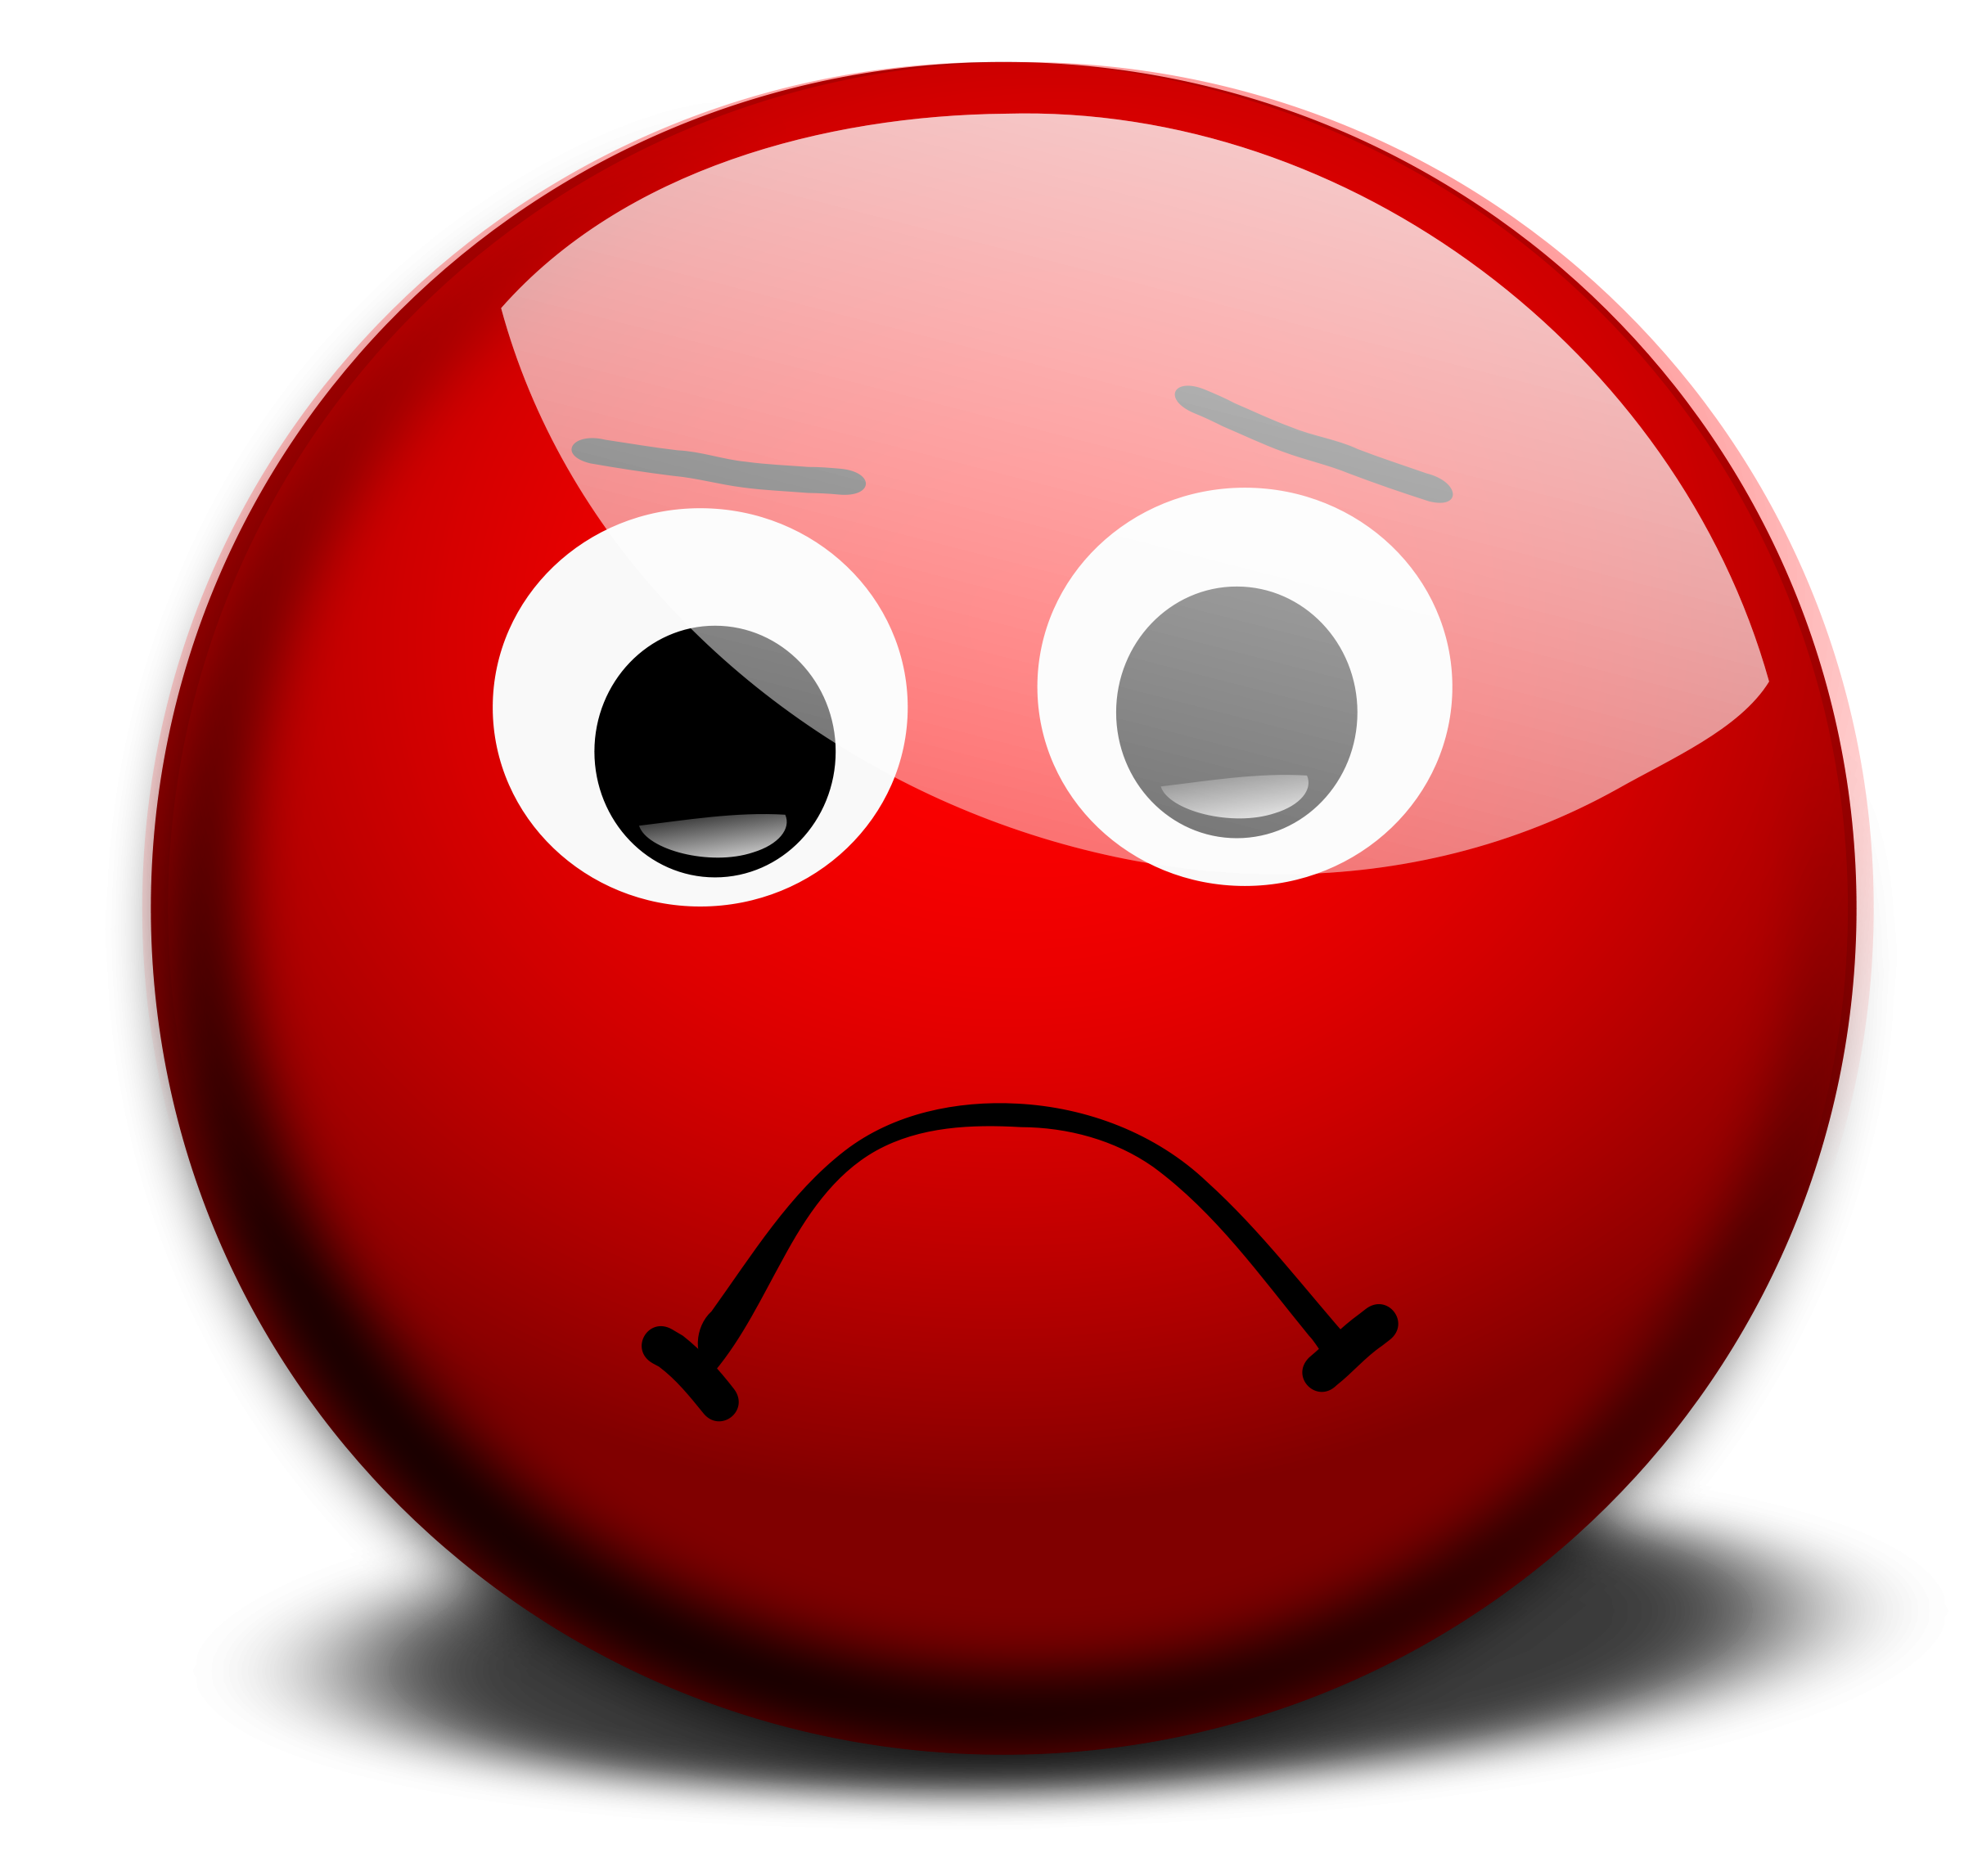 Red Smiley - ClipArt Best